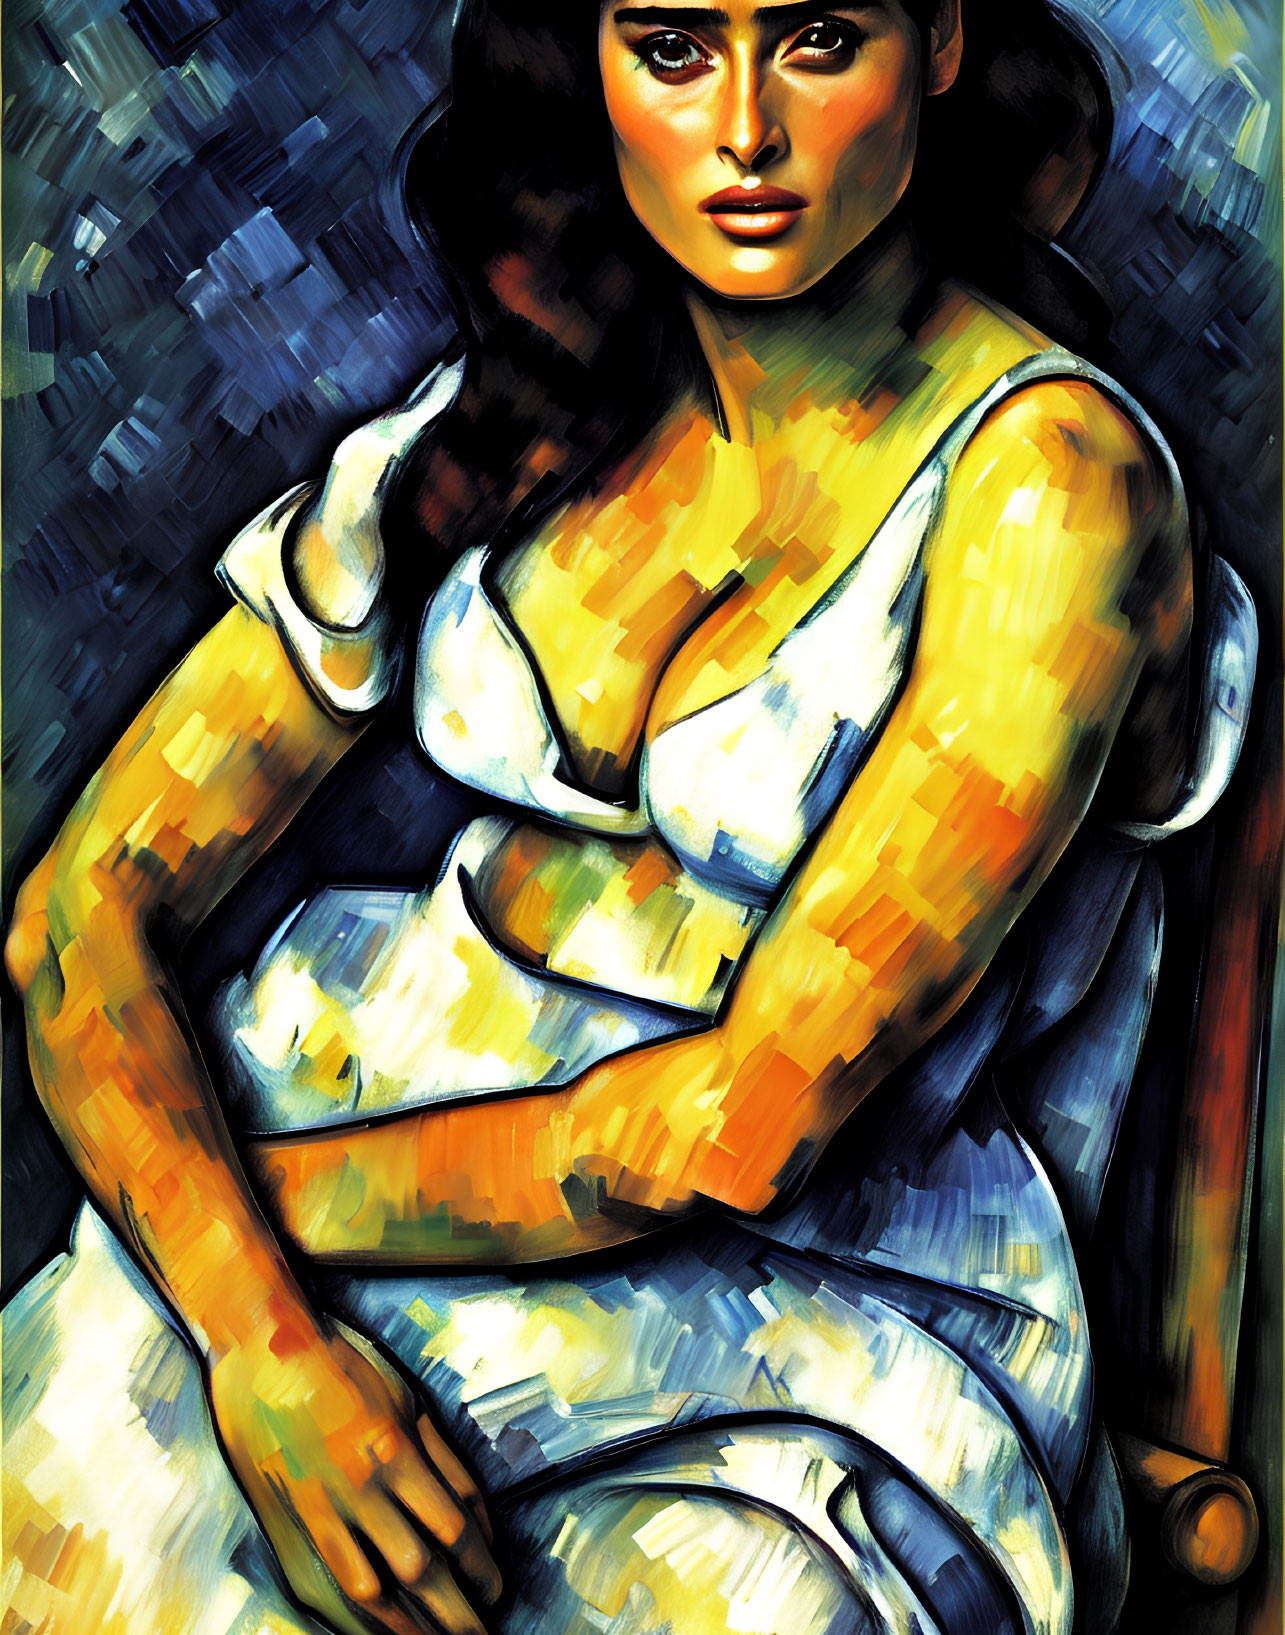 Colorful painting of seated woman with dark hair, bold brushstrokes & vibrant palette